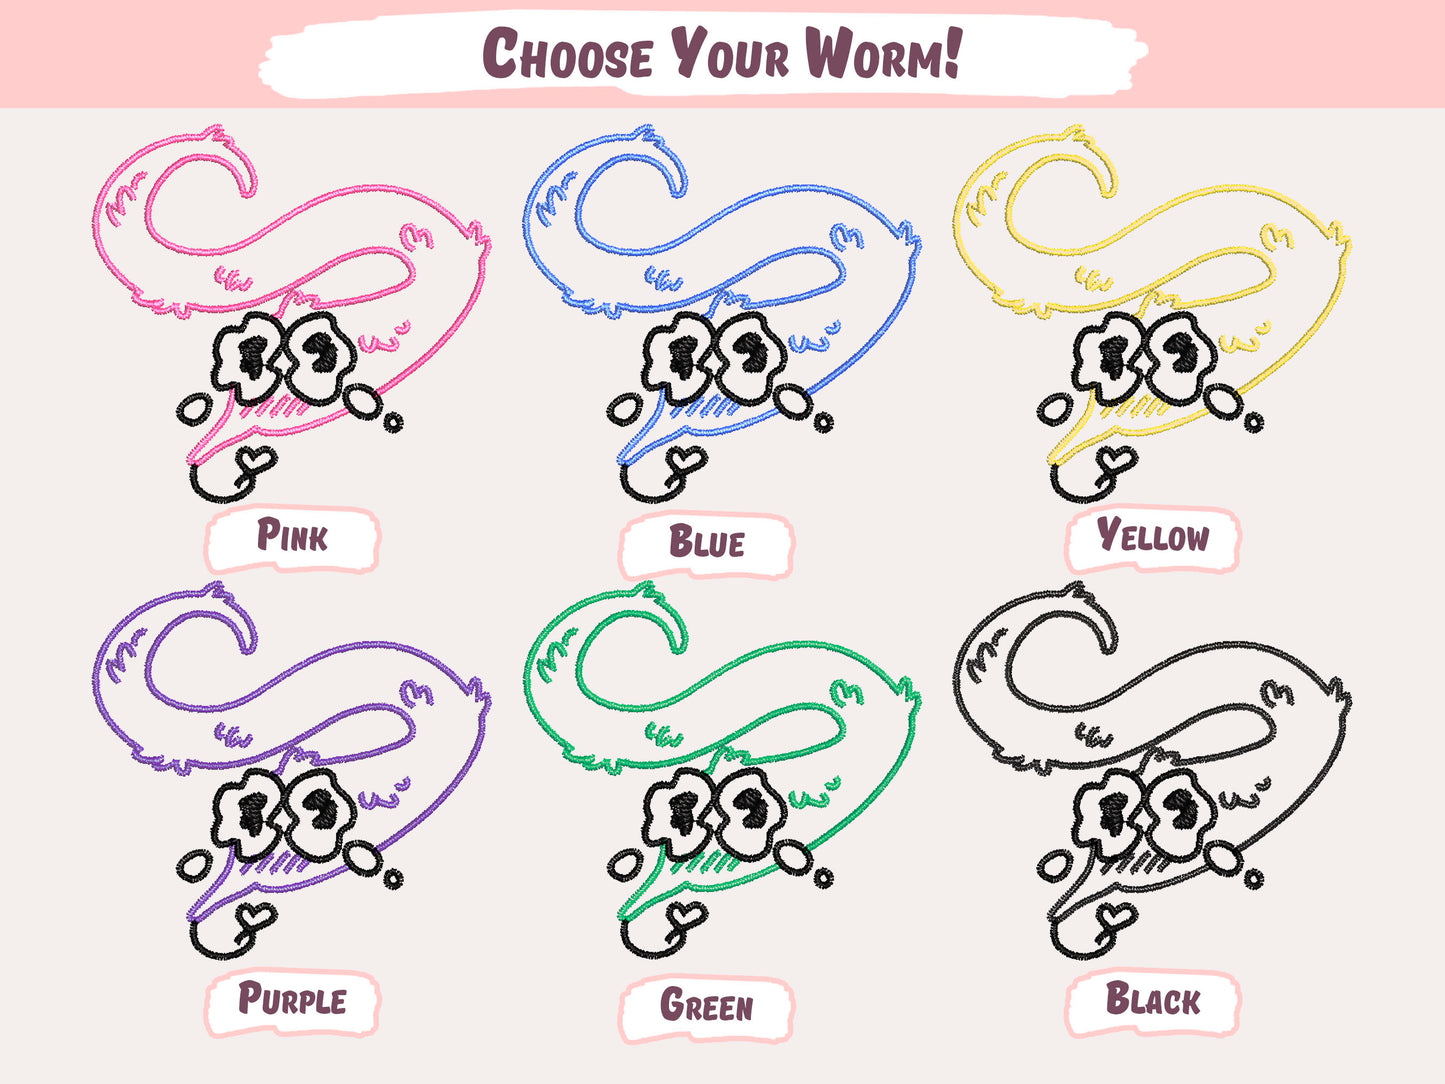 An explanation diagram of choosing what worm colour you would like your custom embroidered worm on a string design. The options are pink, blue, yellow, purple, green, black